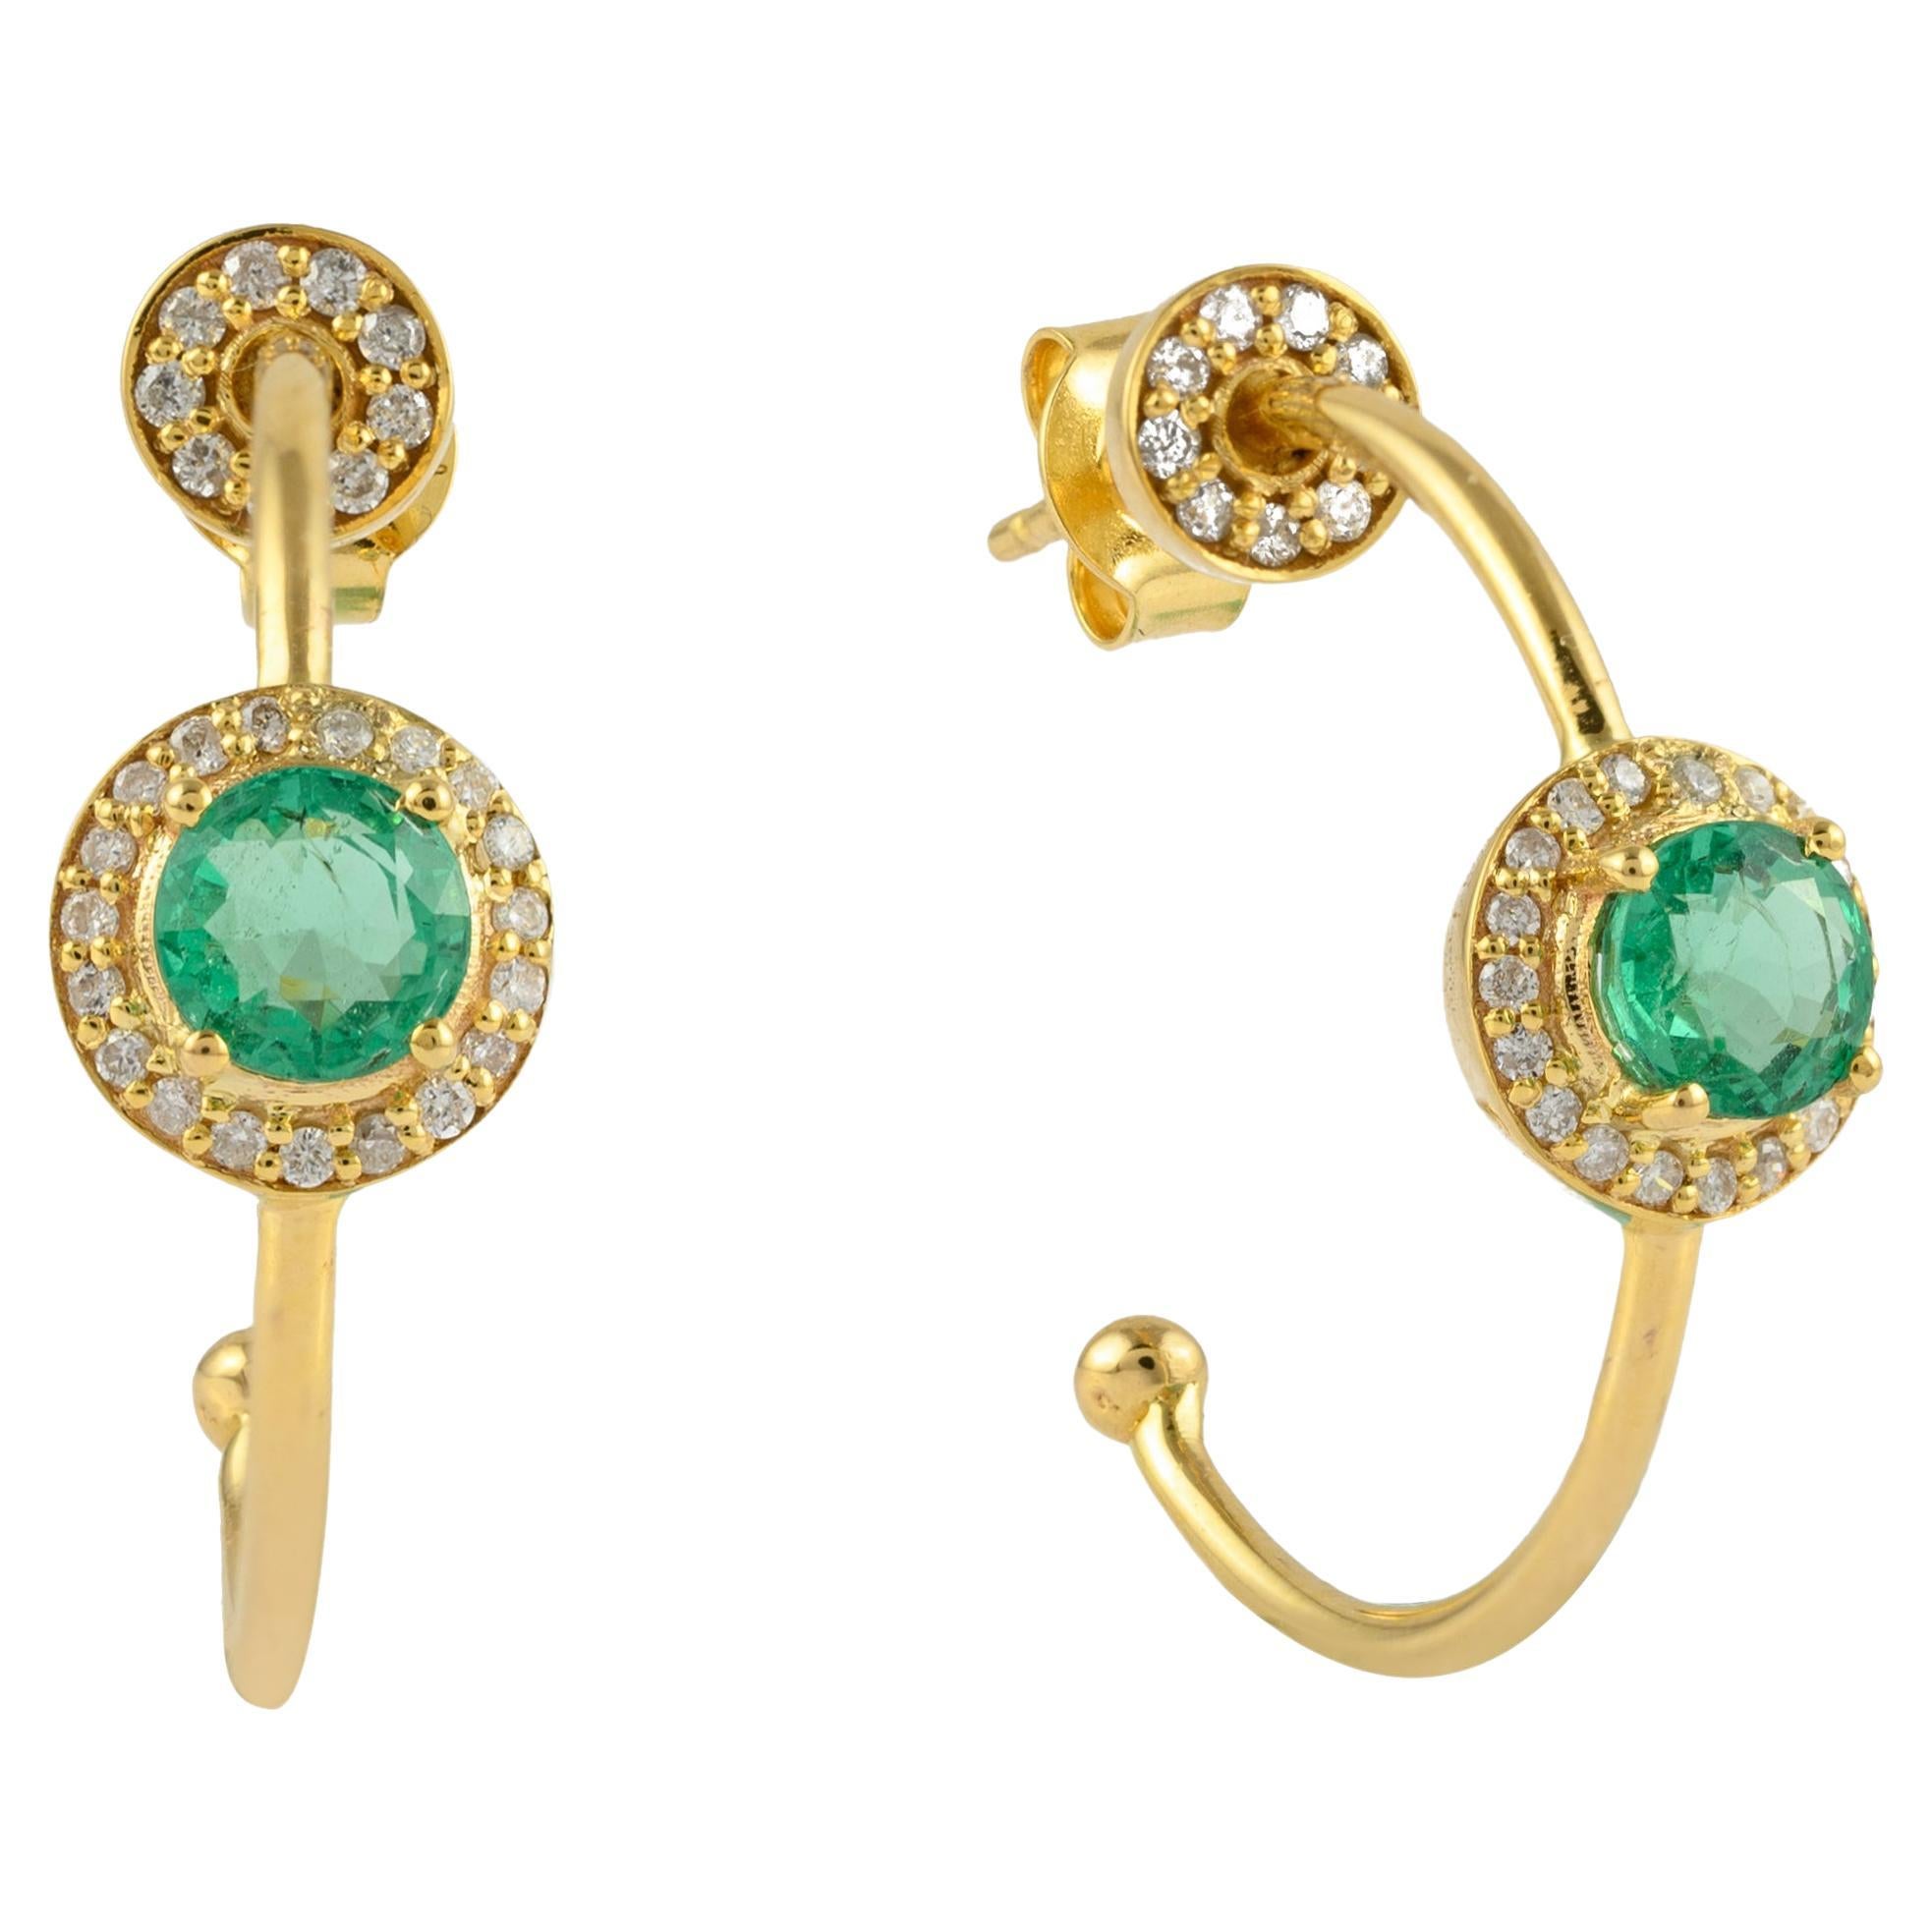 Halo Diamond and Emerald C-Hoop Earrings Made in 14k Solid Yellow Gold